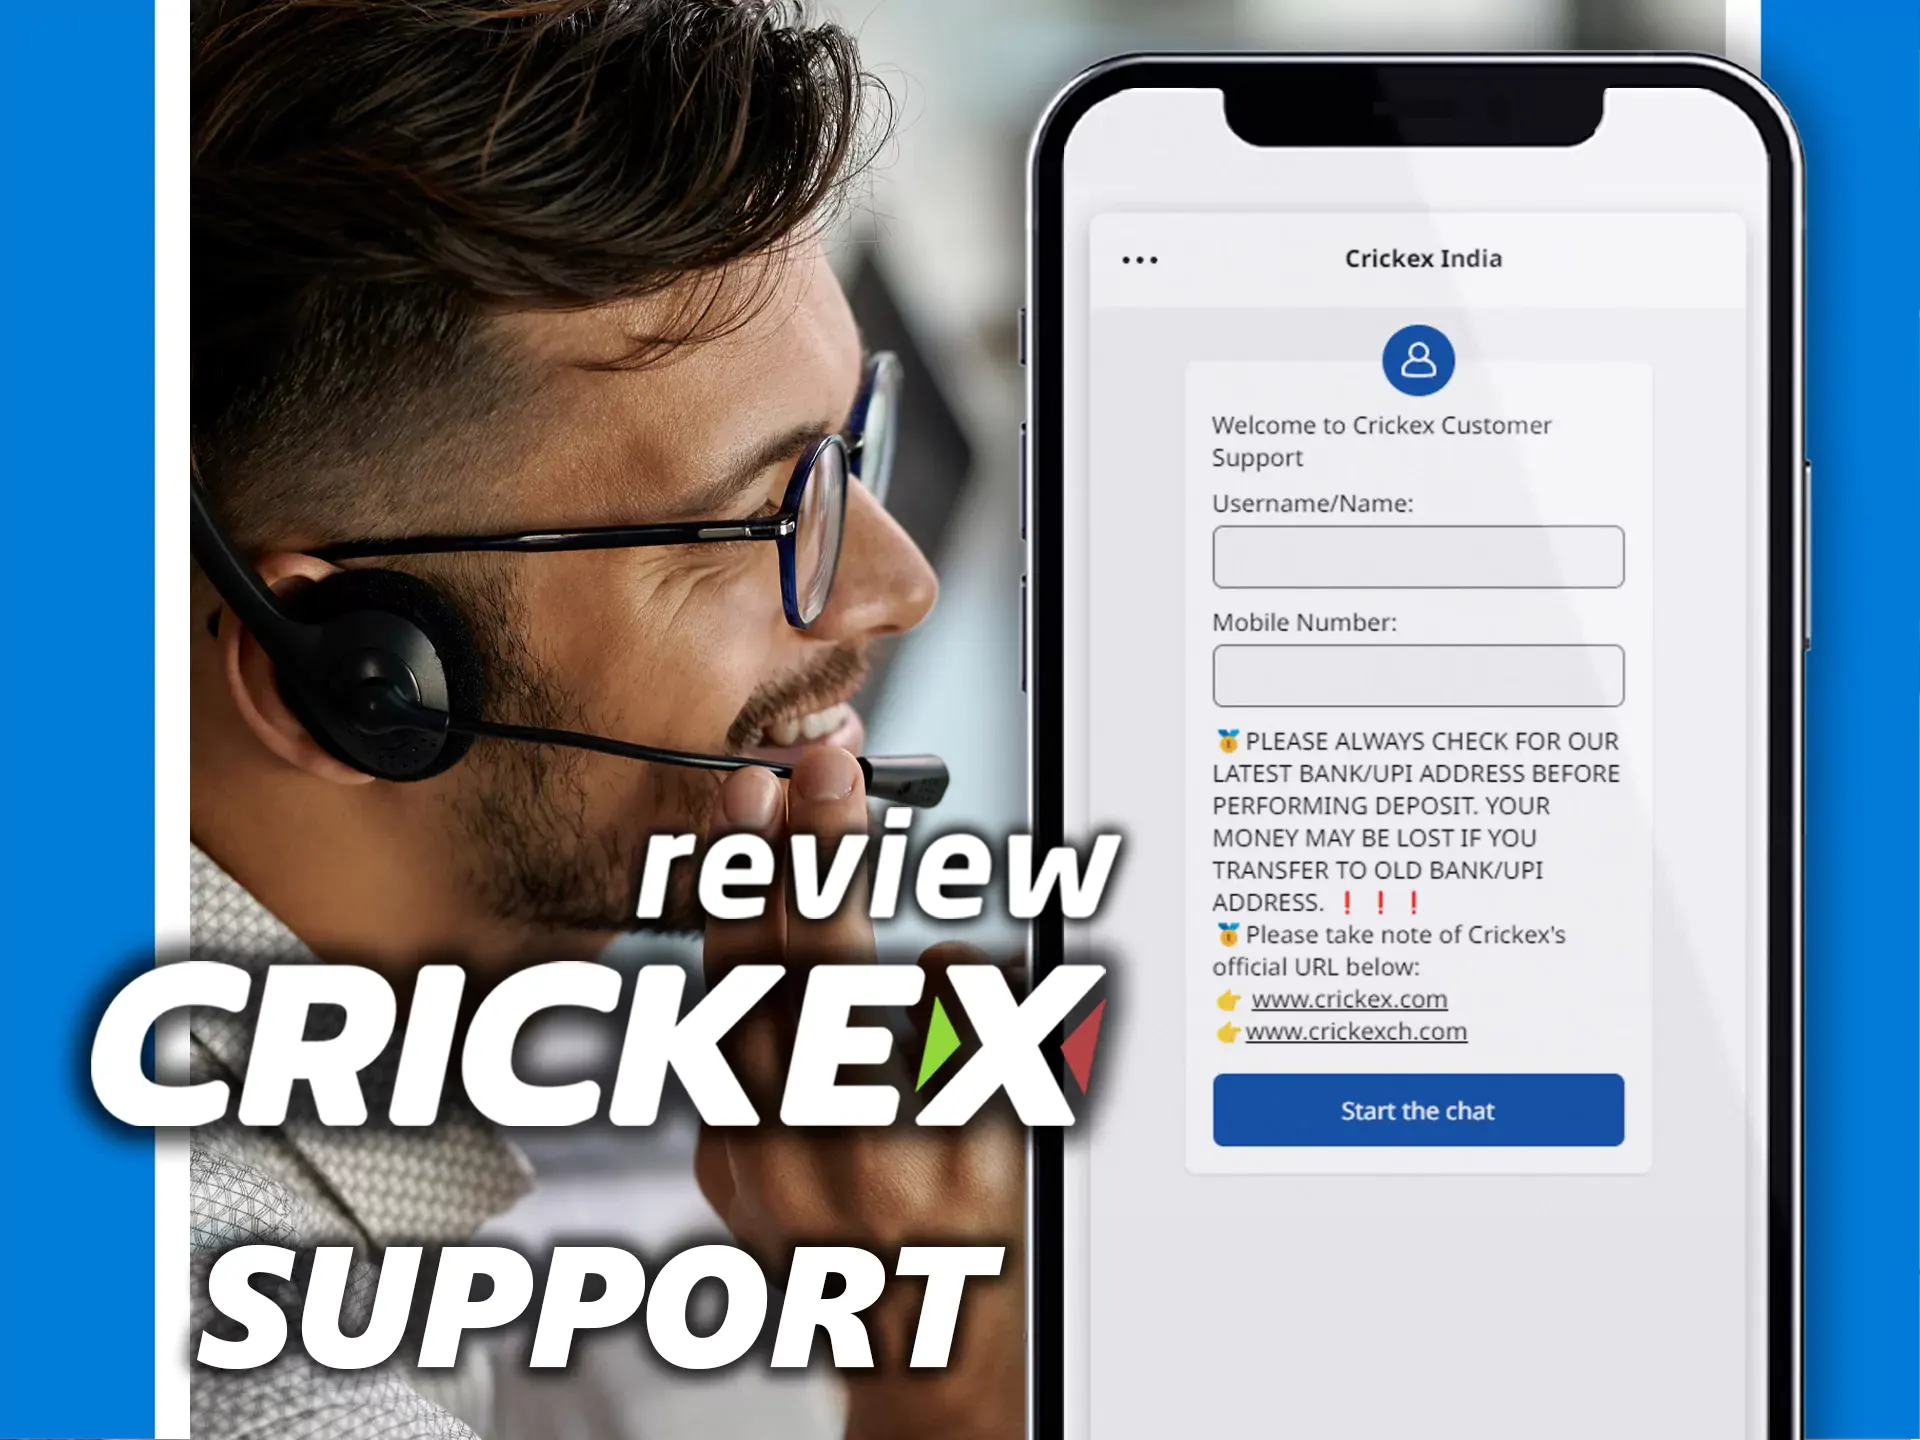 User support is available in the Crickex app.